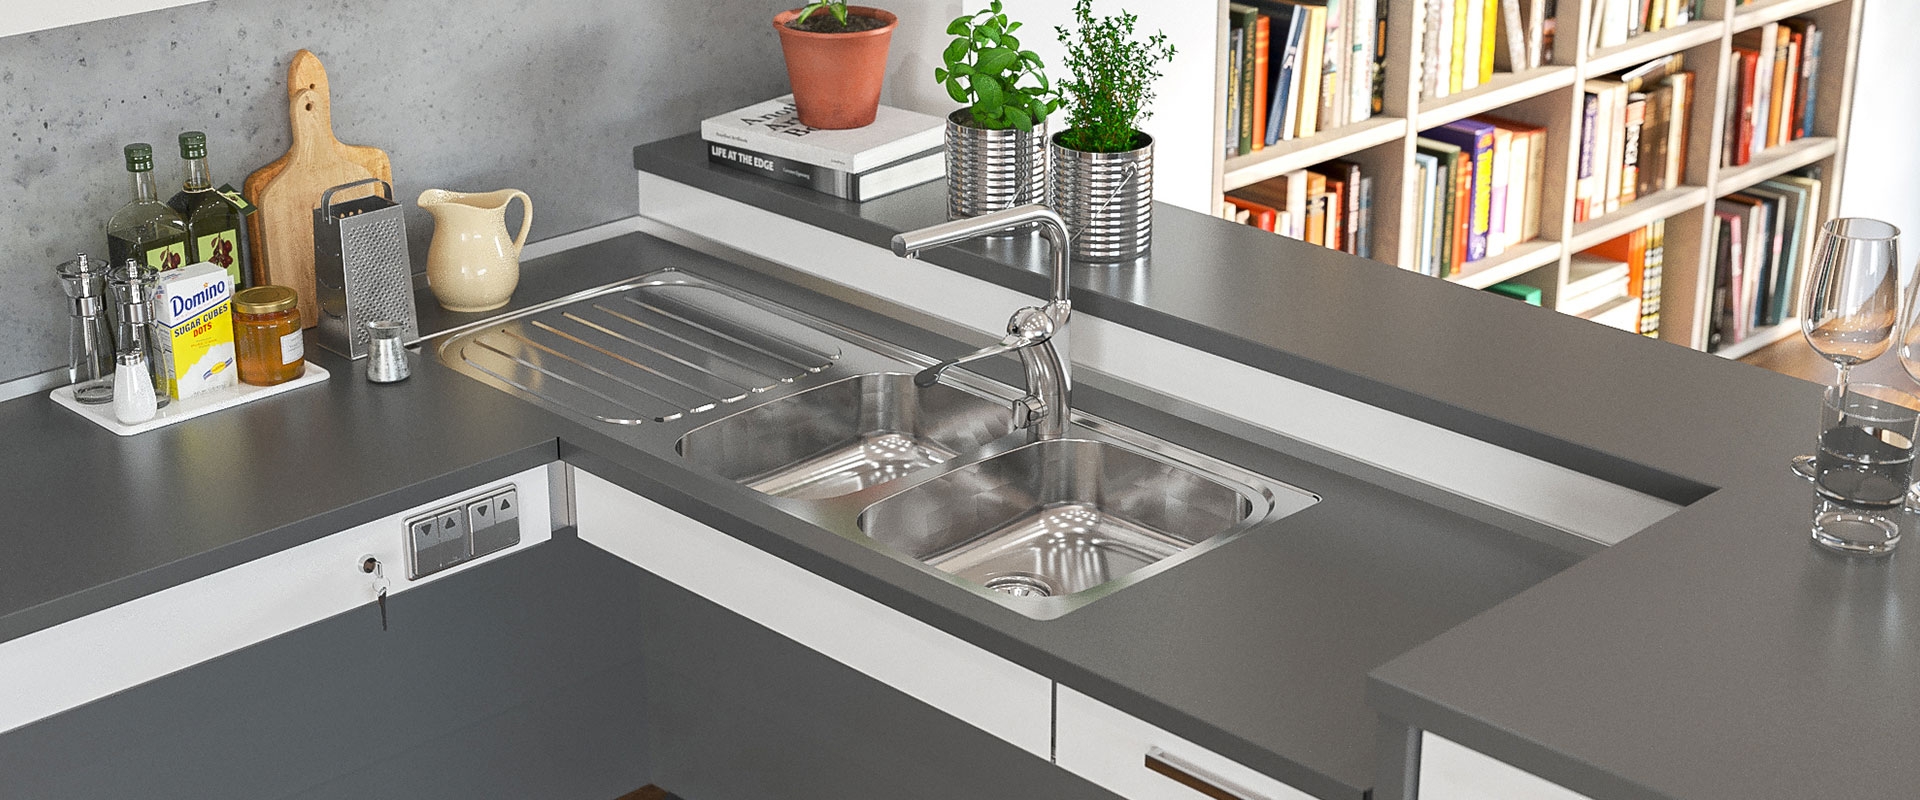 Wheelchair Accessible Inset Sinks With Shallow Bowl